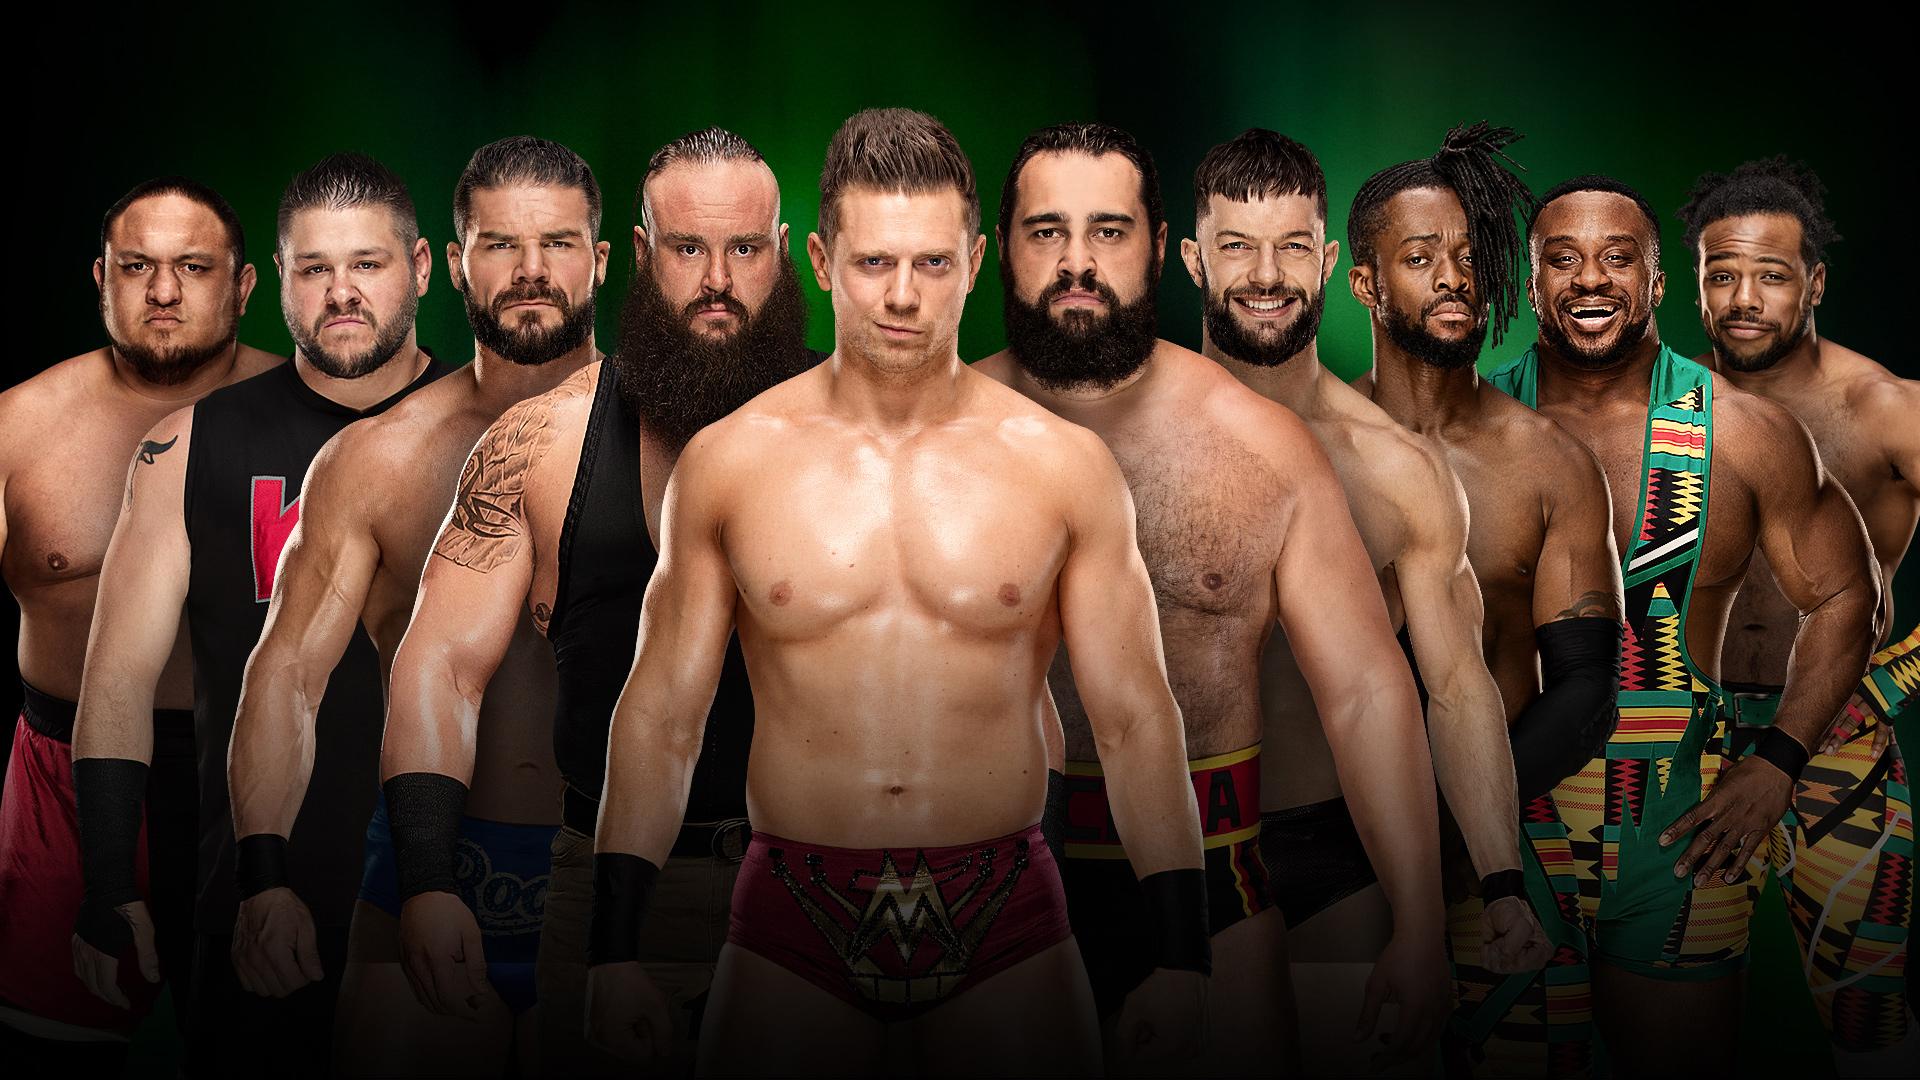 What to Expect at Tonight’s Money in the Bank Event